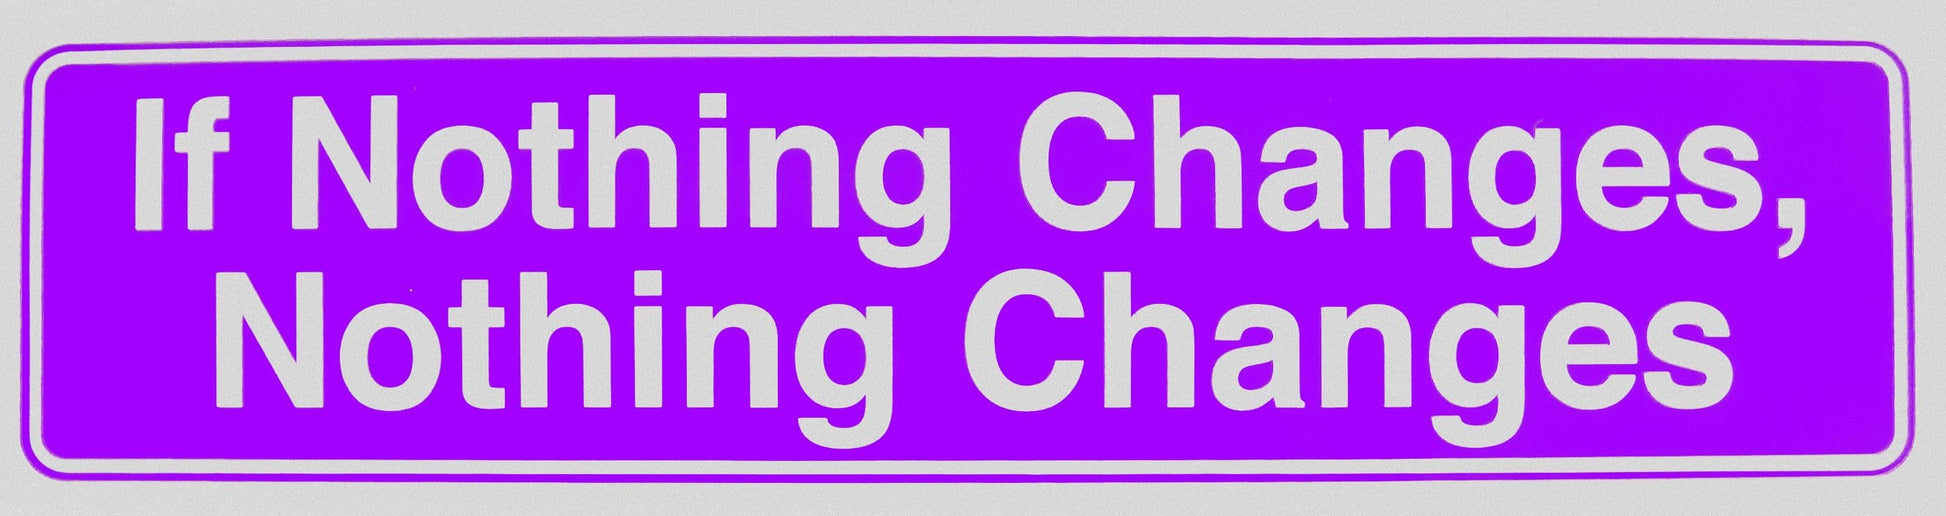 If Nothing Changes Nothing Changes Bumper Sticker Purple